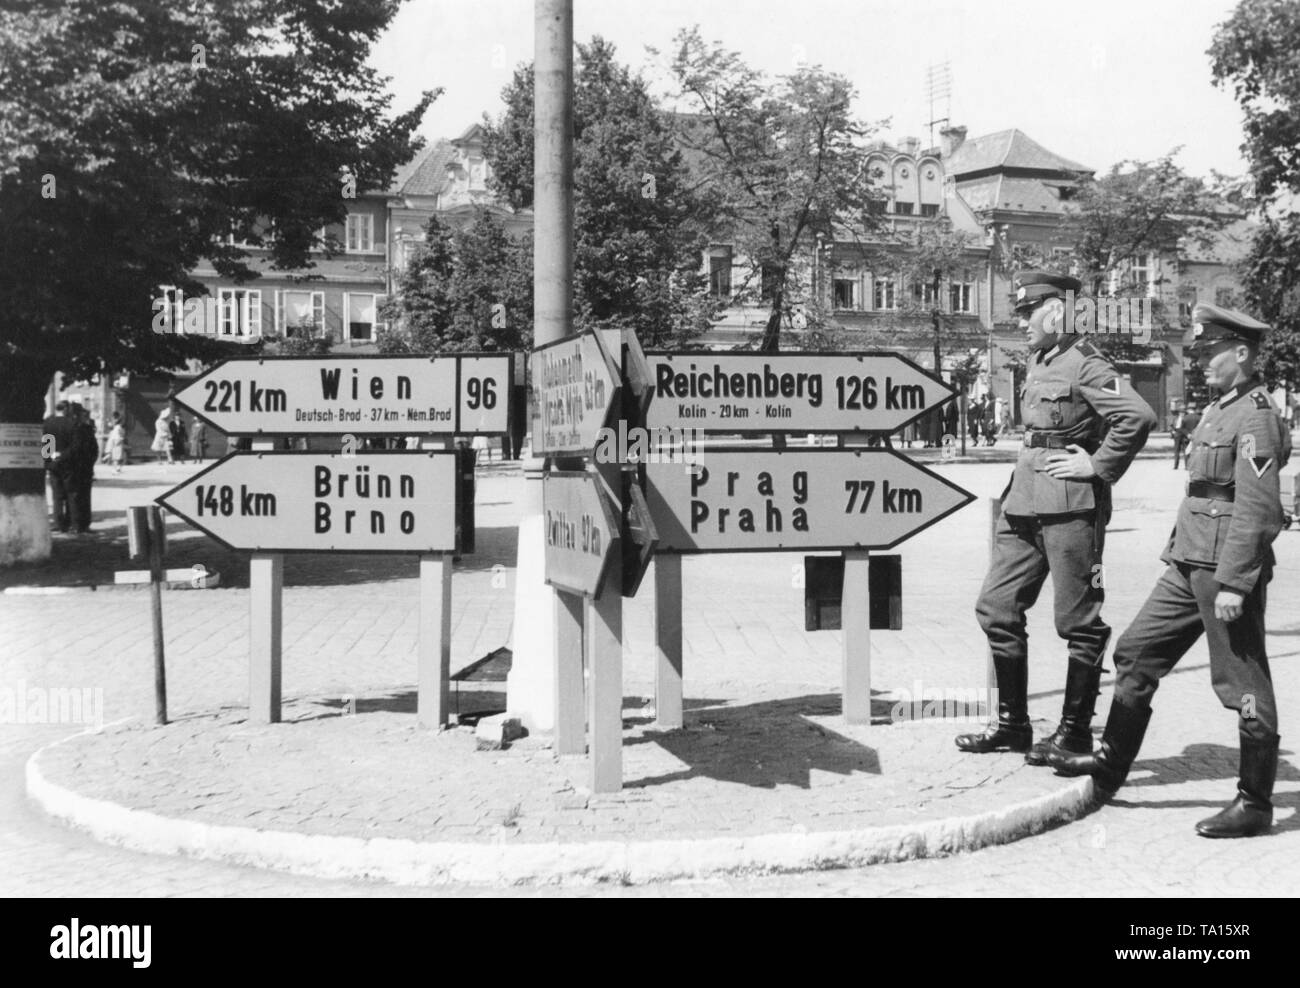 Soldiers of the Wehrmacht observe at the street signs, which are in German and Czech. Since March 1939, the territories of Bohemia and Moravia had been under German occupation. Stock Photo